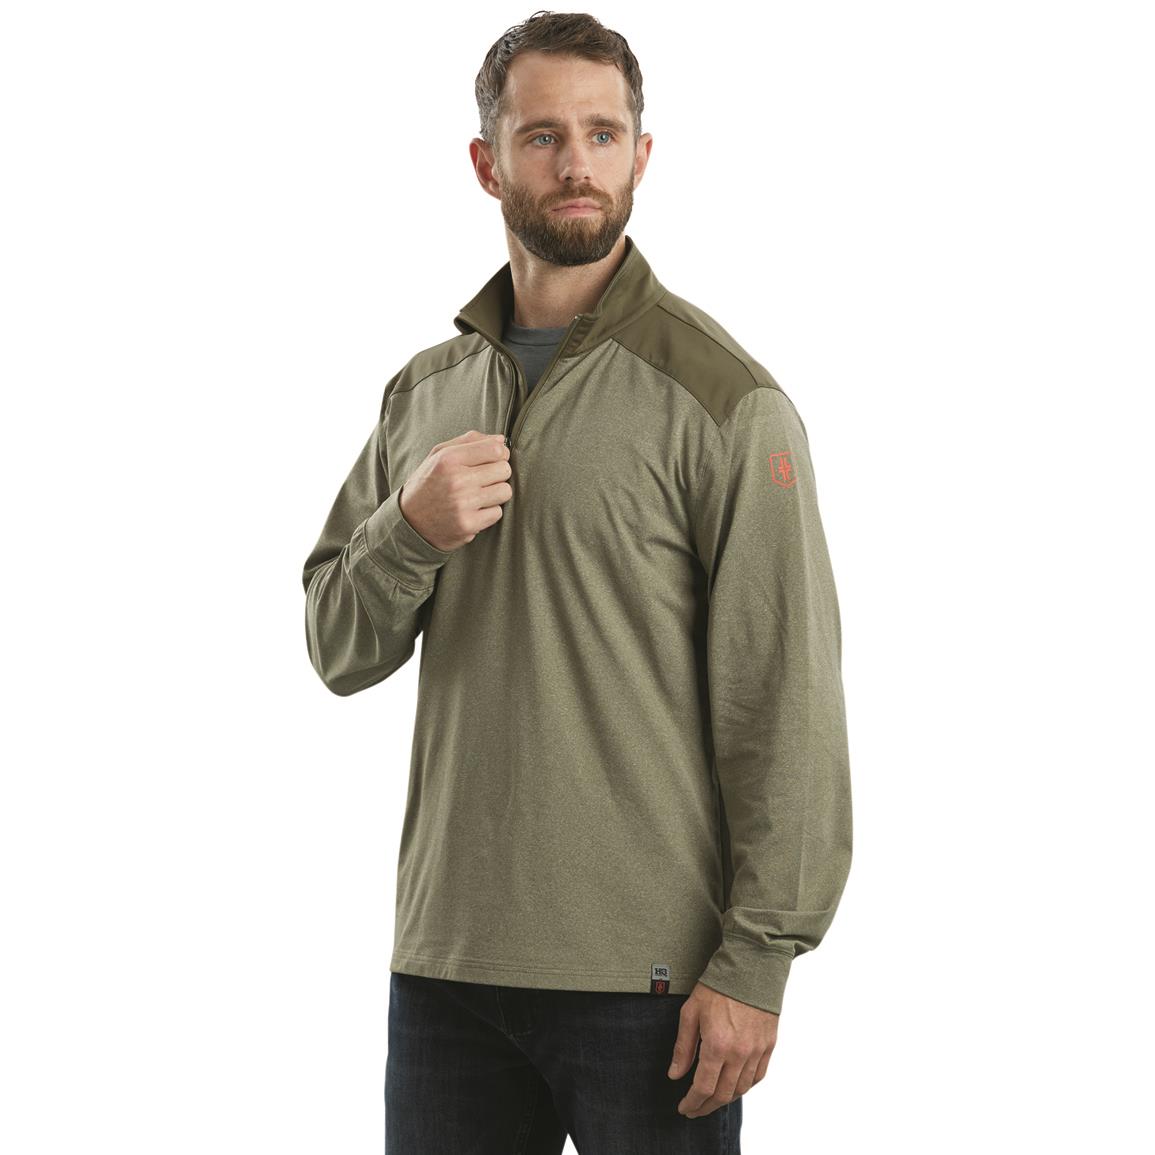 HQ ISSUE + Warrior Poet Society CCW Half-zip Performance Pullover, Grapeleaf